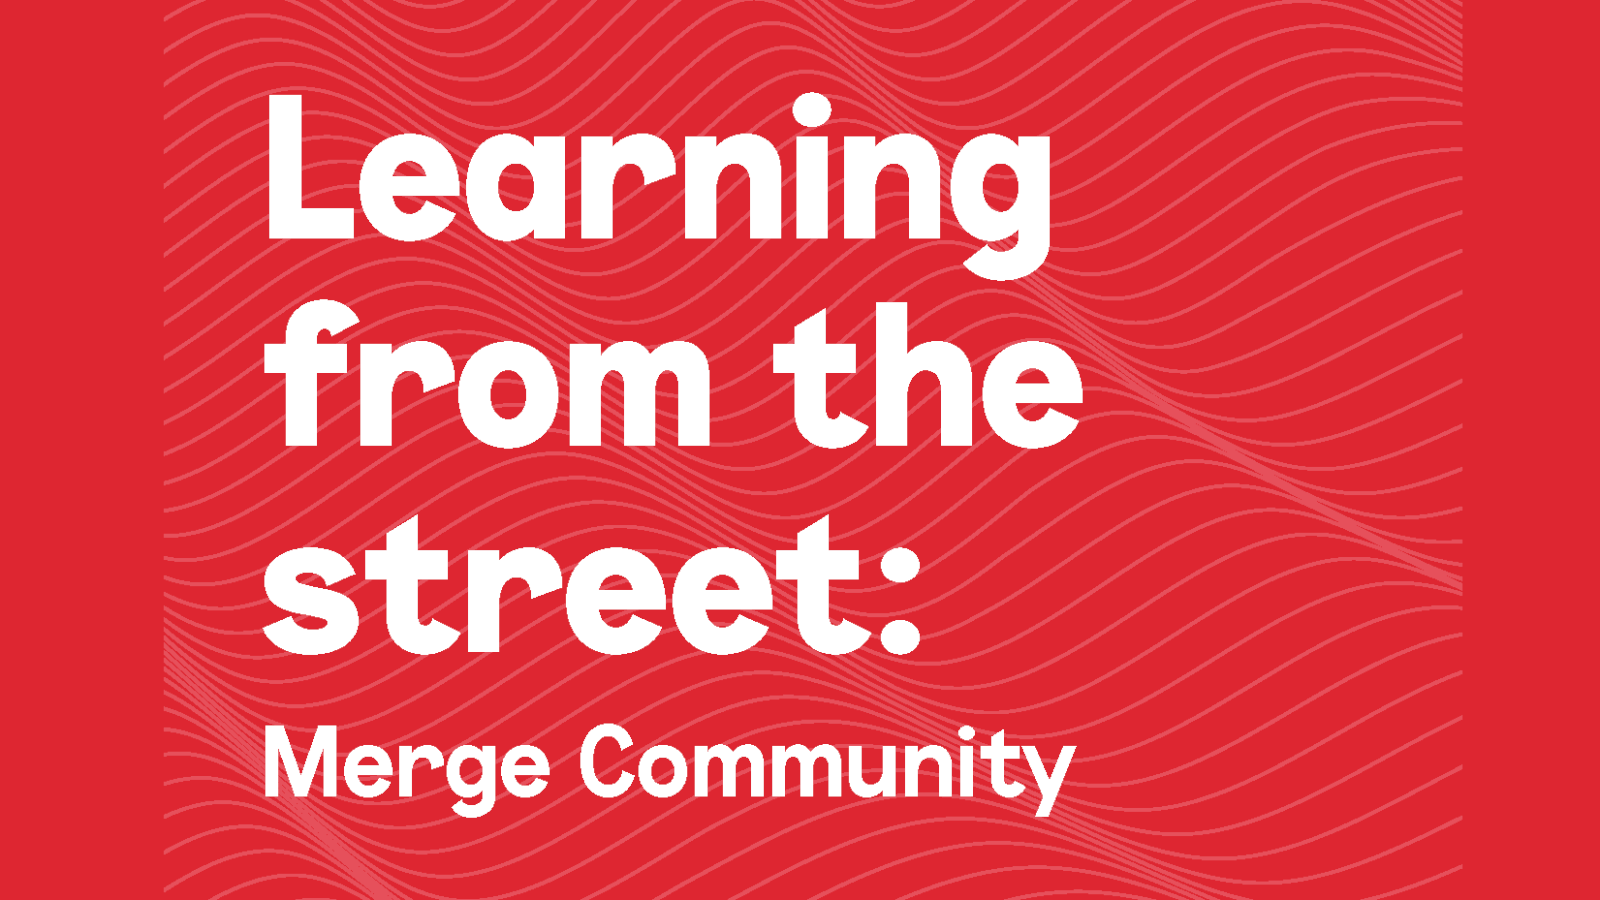 Merge Community: Learning from the street